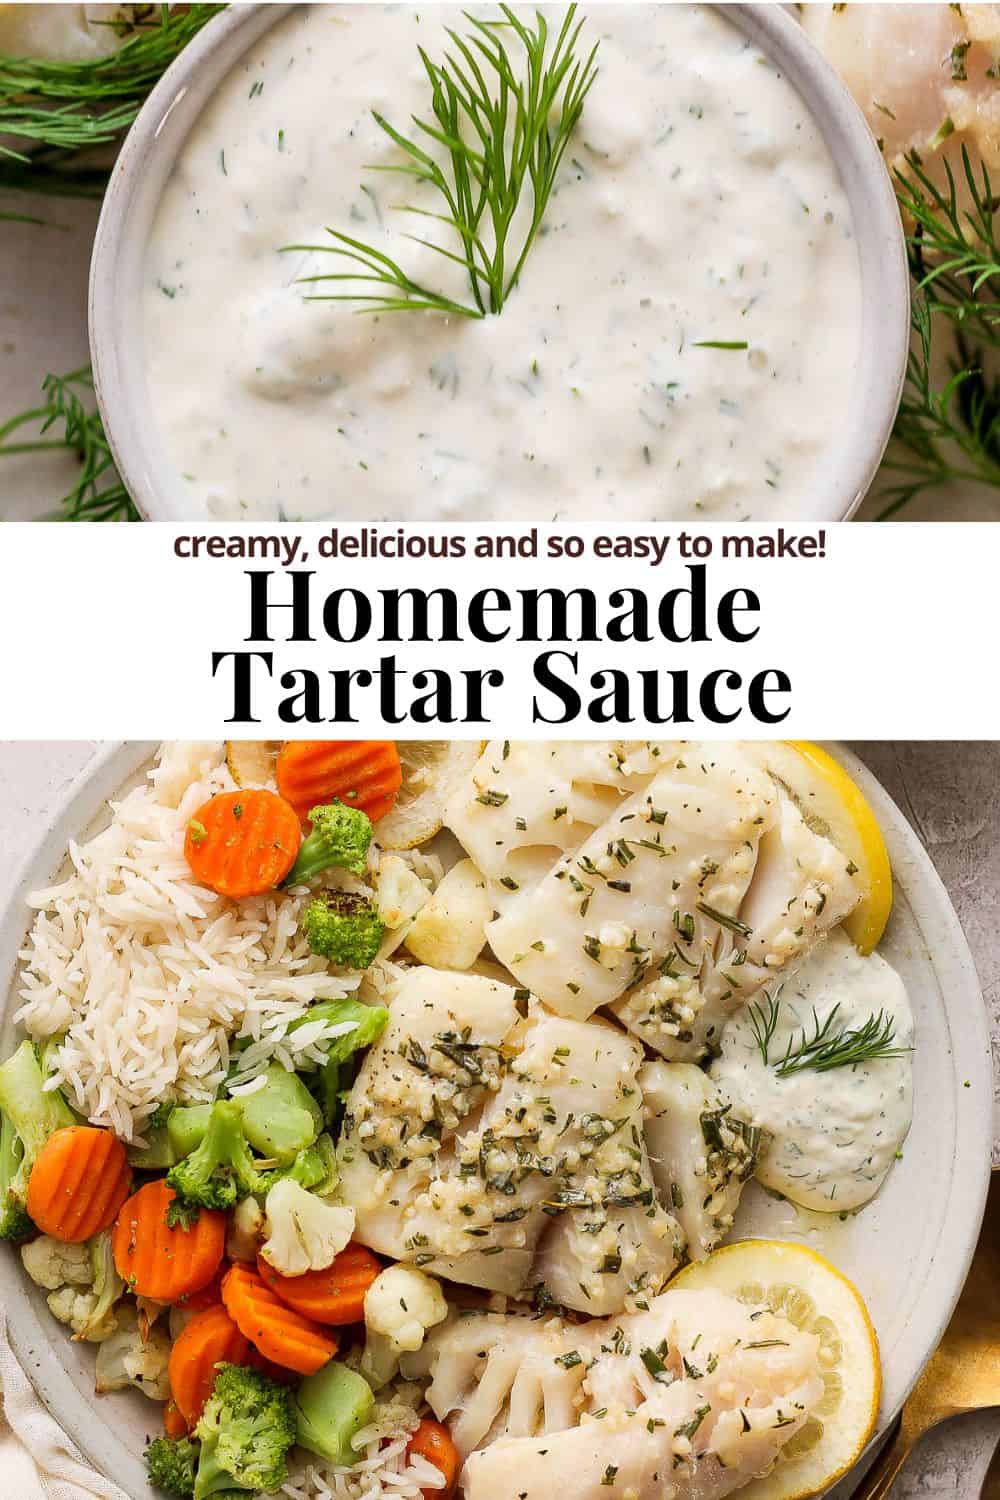 Pinterest image that shows the same dinner plate with the title "homemade tartar sauce. creamy, delicious, and so easy to make."